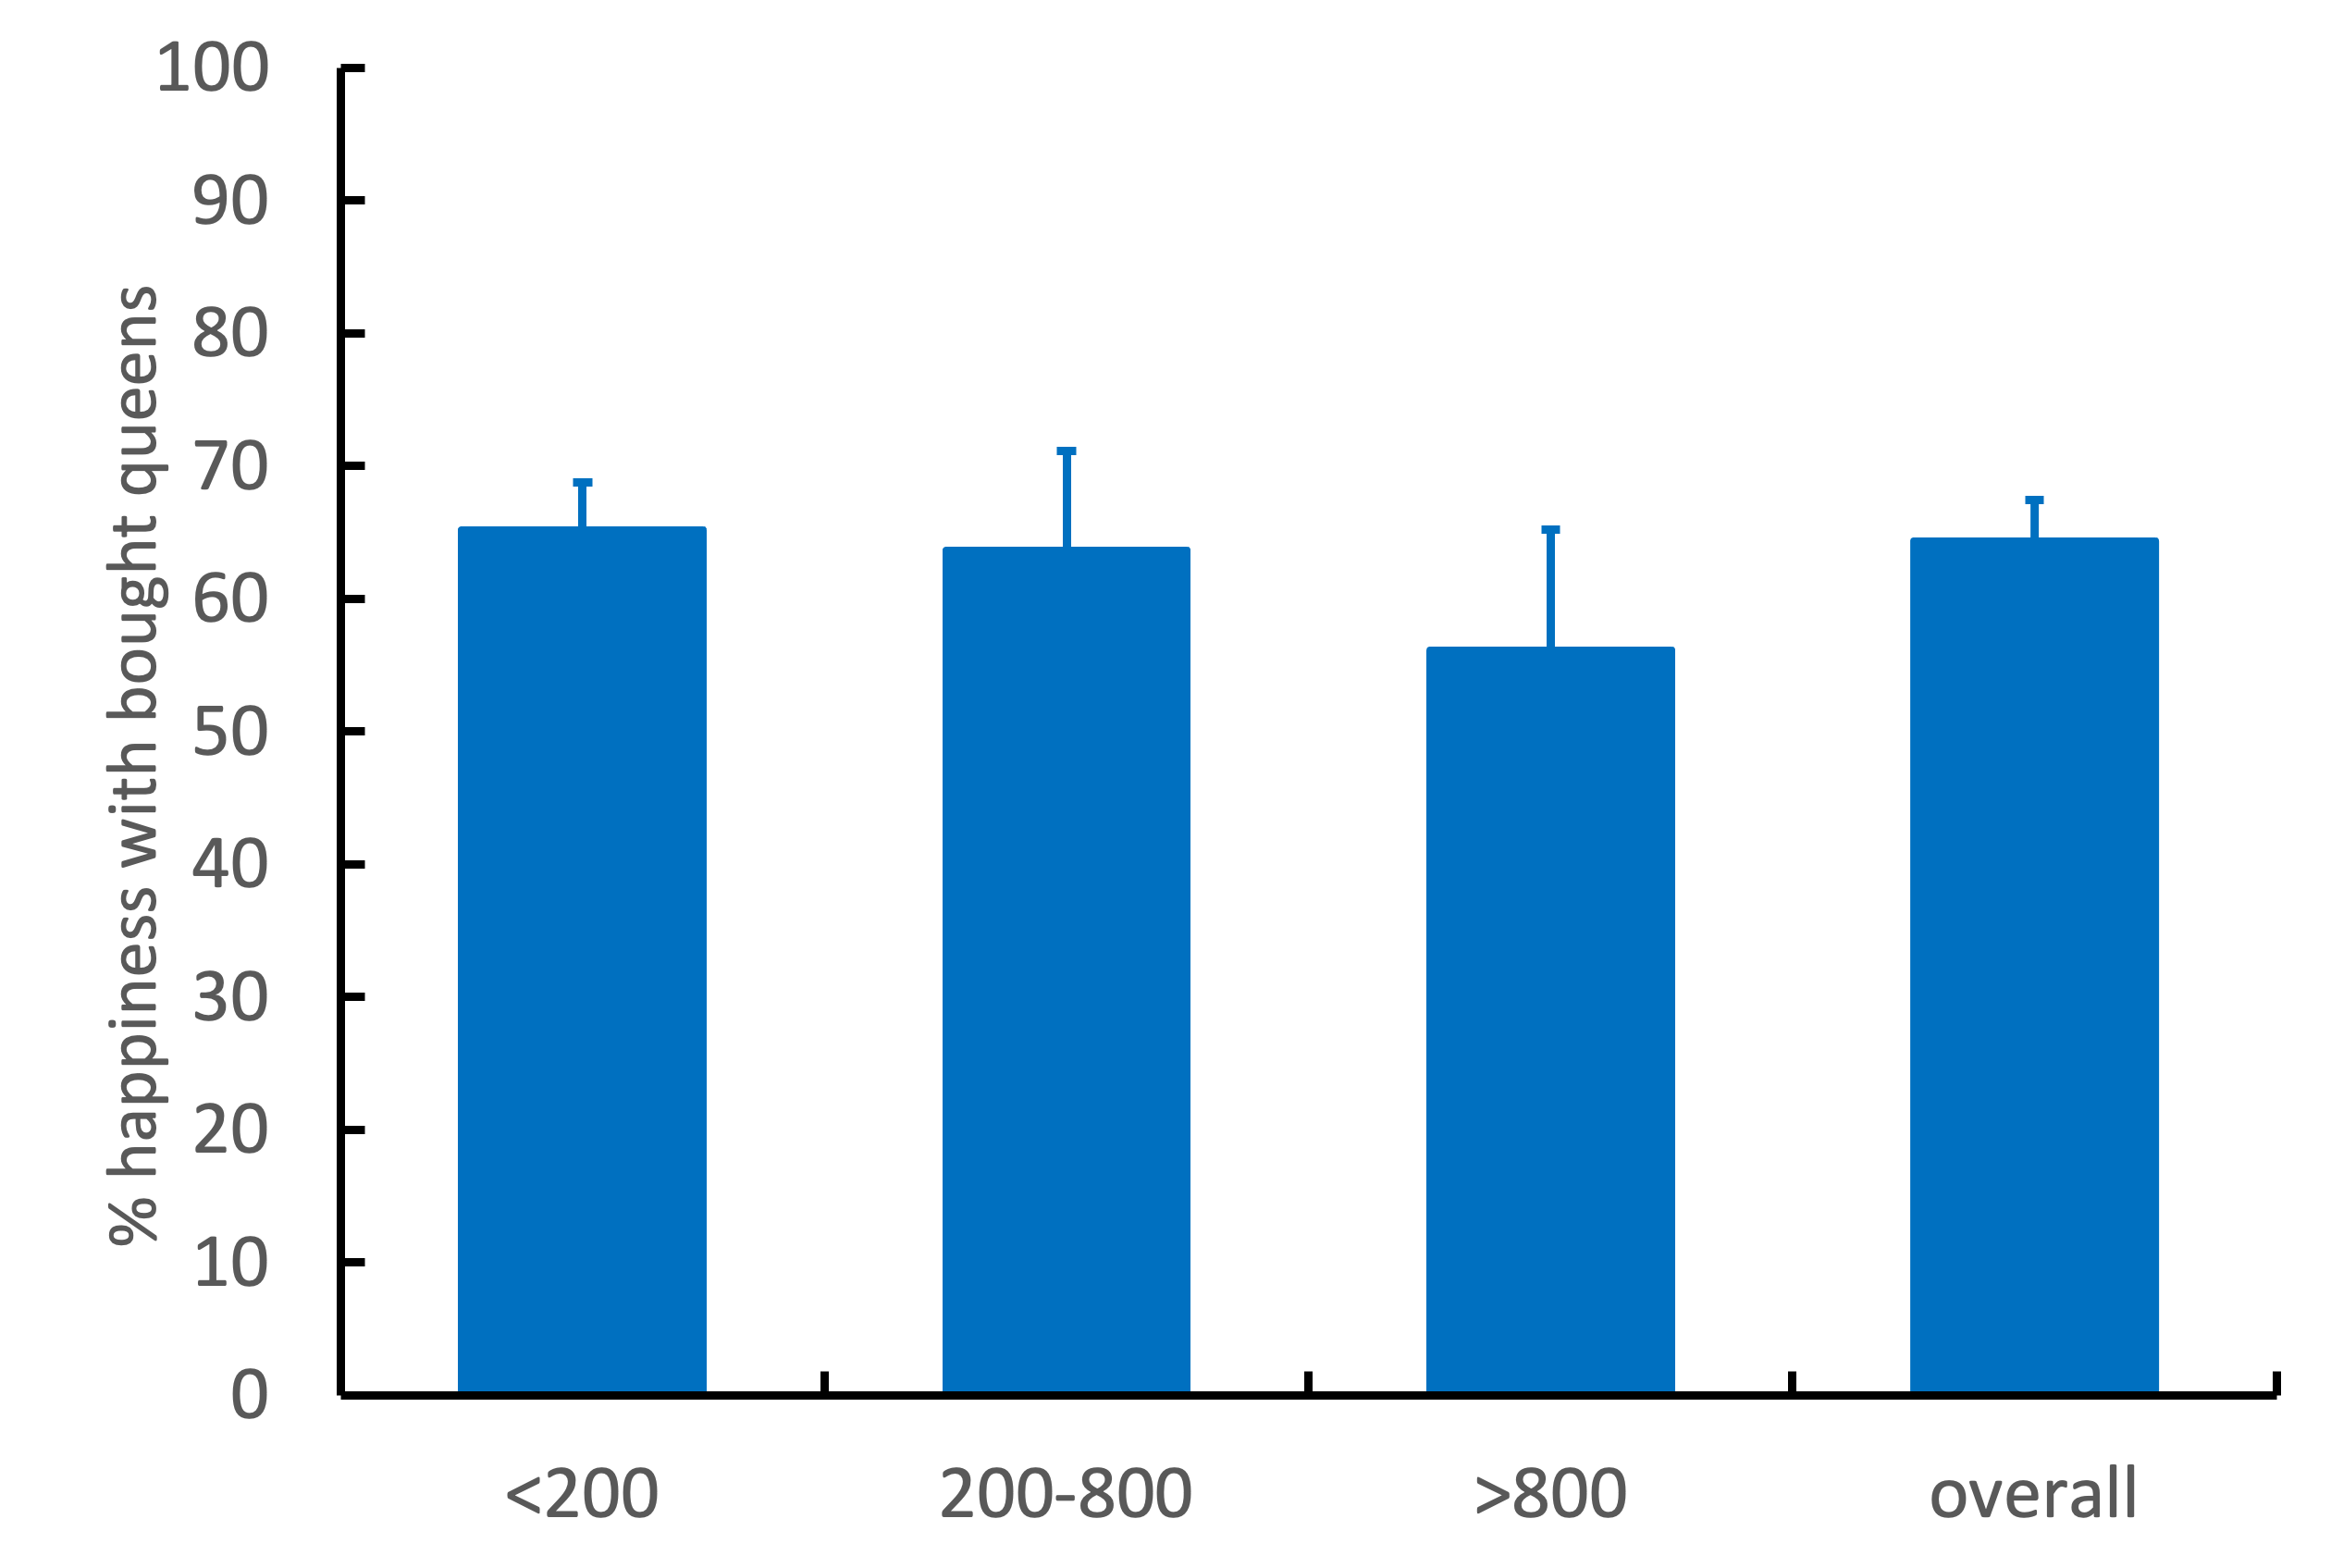 Figure showing % happiness with bought queens by recreational/semi-commercial (<200 hives), commercial (200-800 hives) and large commercial (>800 hives) beekeepers